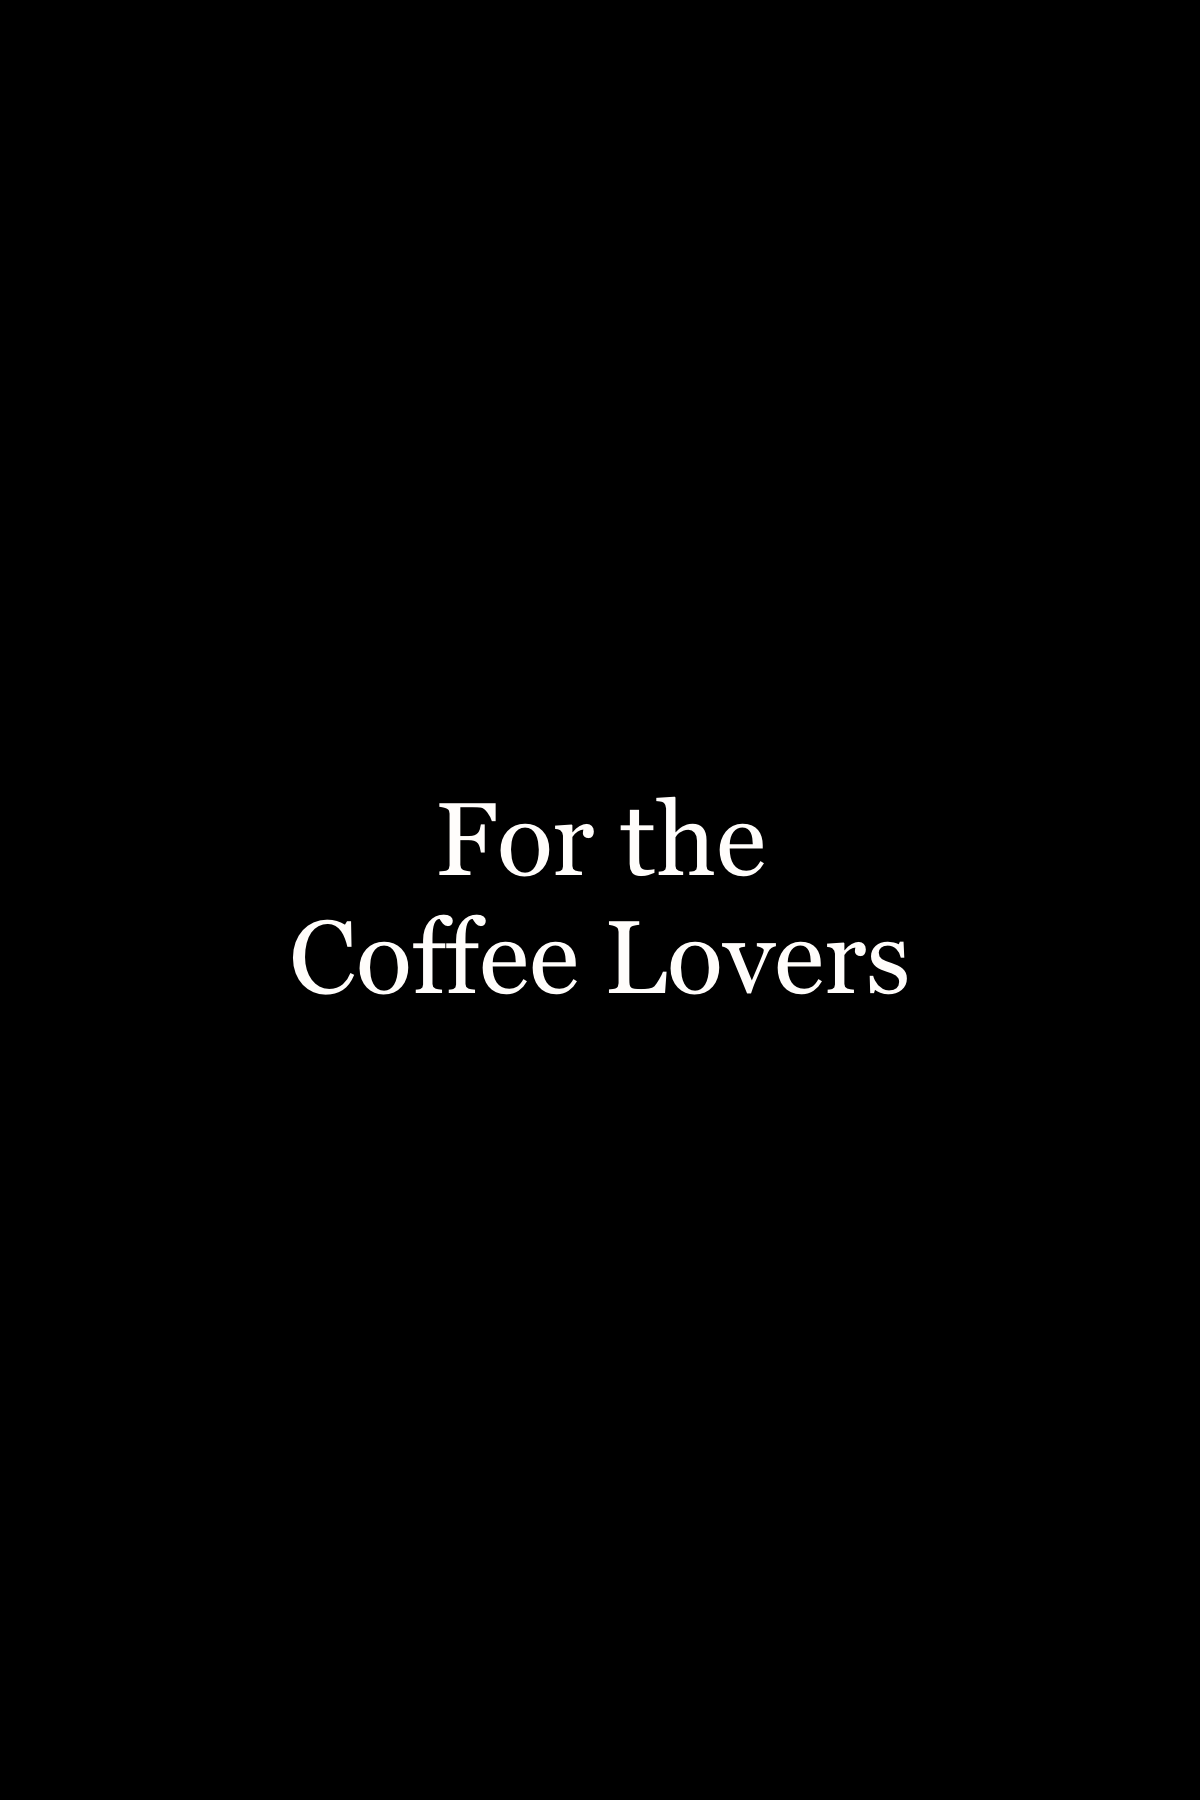 For the Coffee Lovers